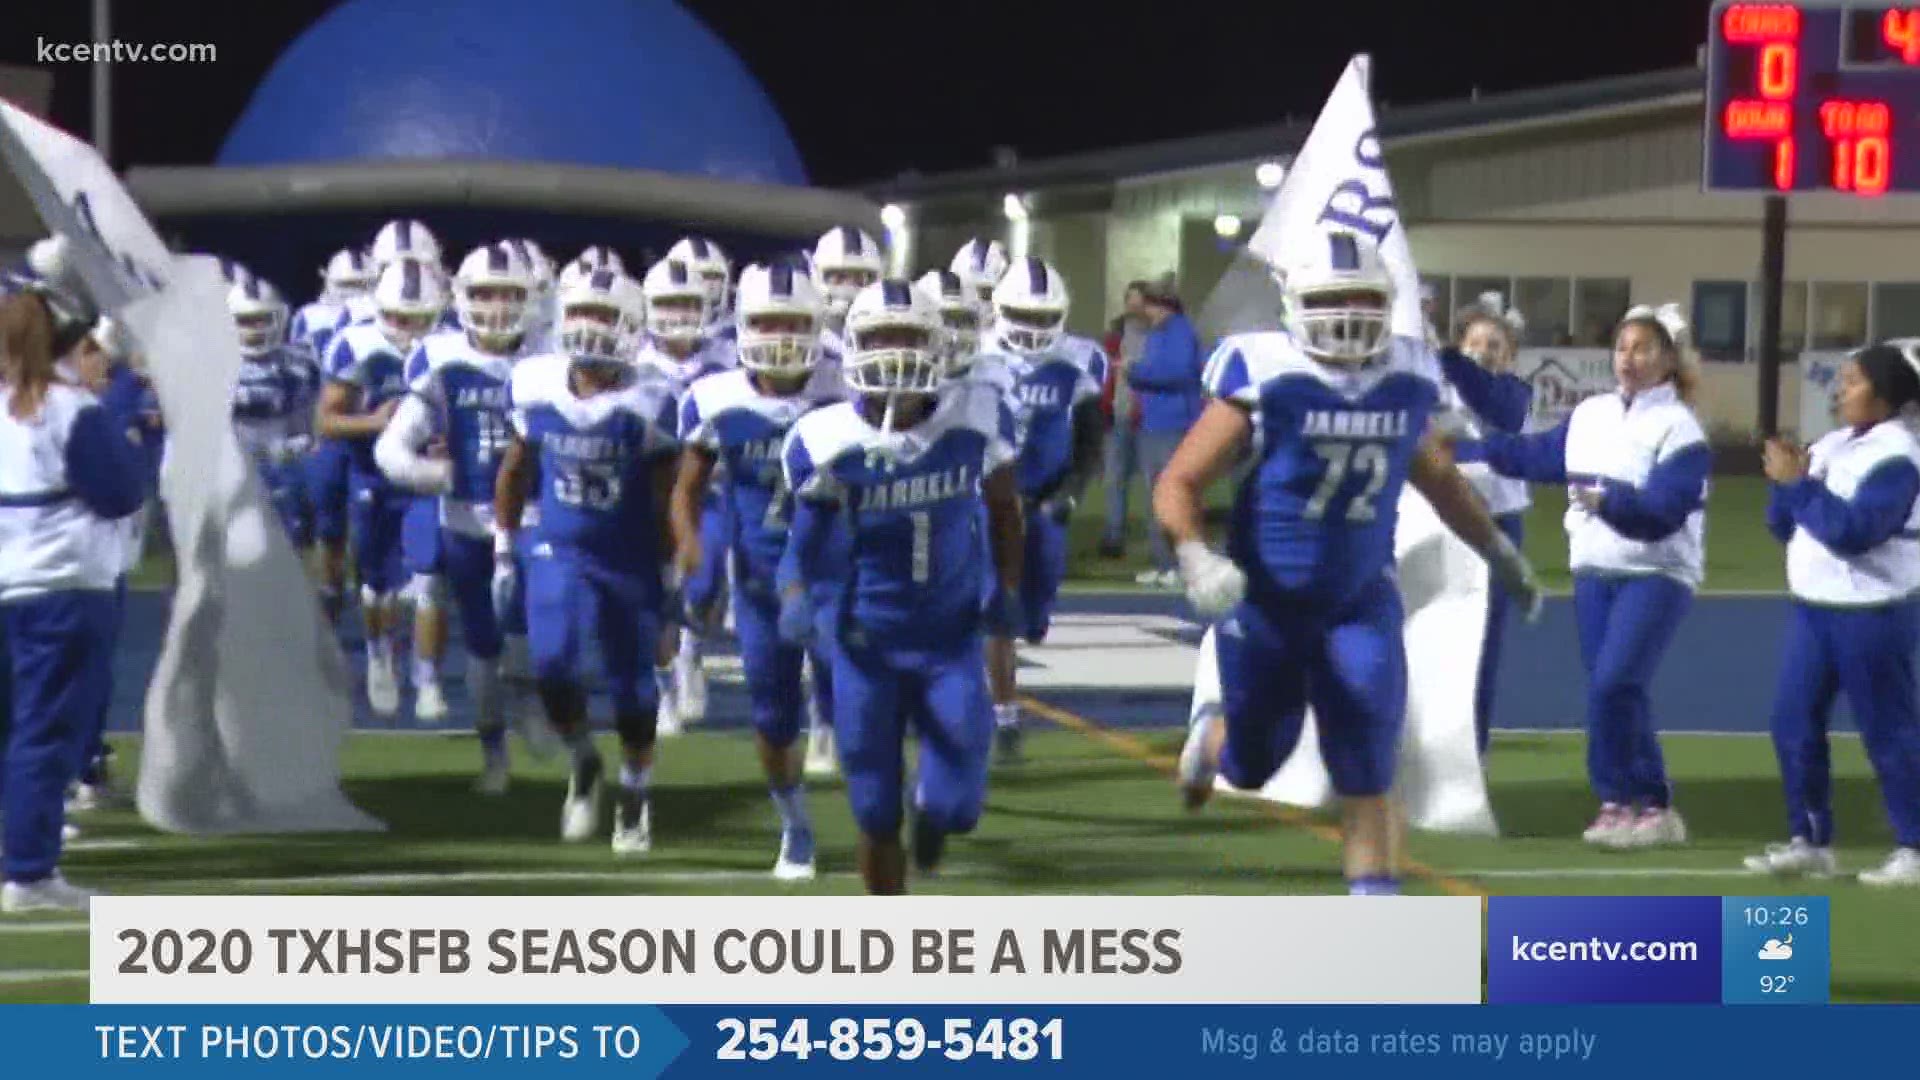 With so many moving parts statewide, one Texas High School Football analyst described the approaching 2020 season as "a mess."